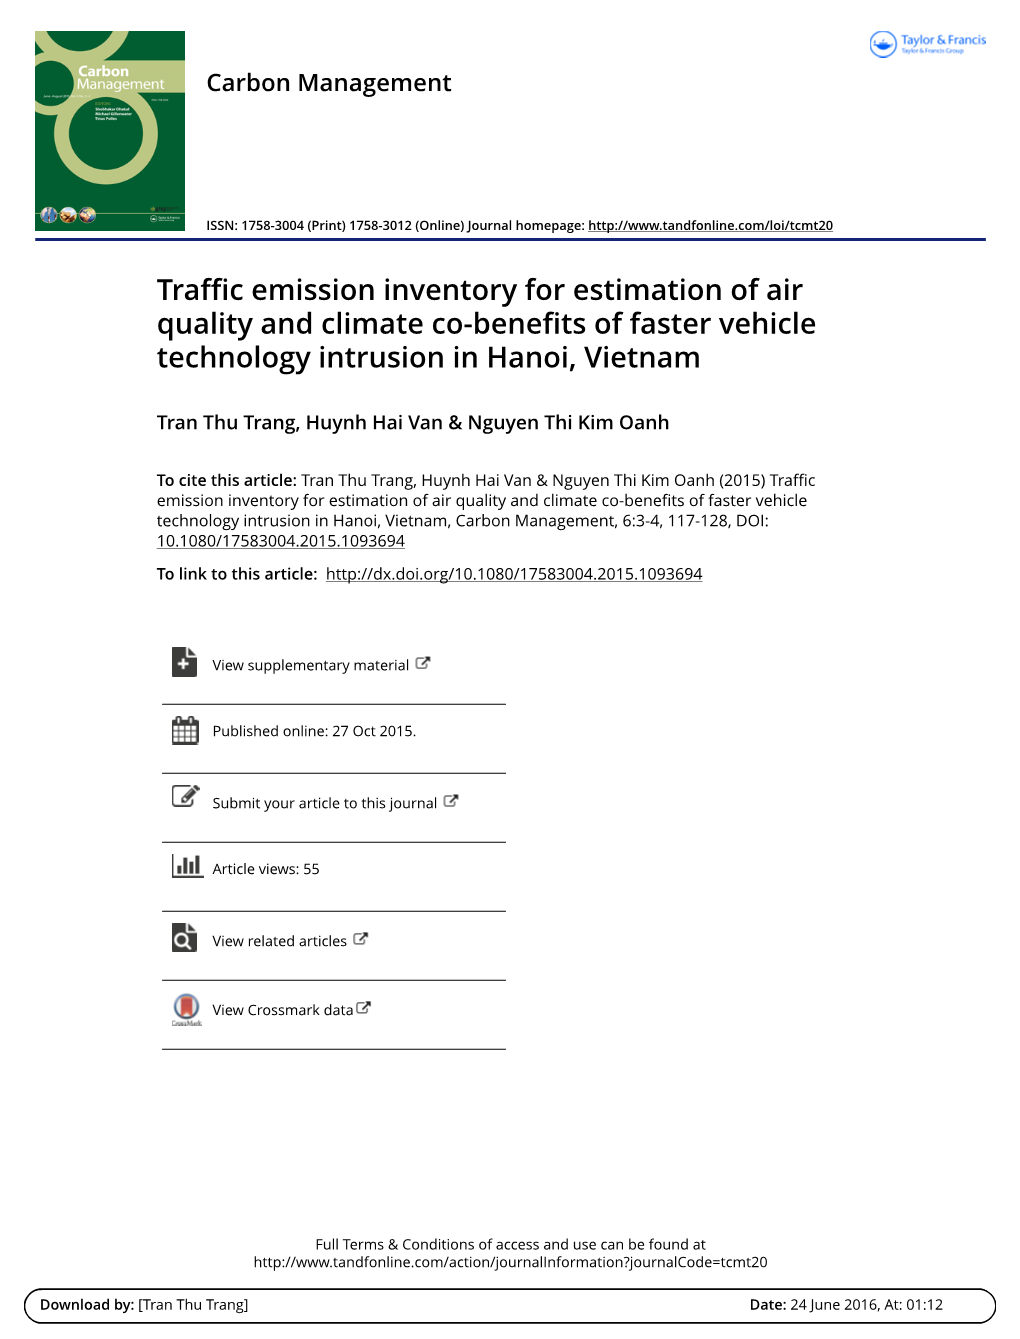 Traffic Emission Inventory for Estimation of Air Quality and Climate Co-Benefits of Faster Vehicle Technology Intrusion in Hanoi, Vietnam